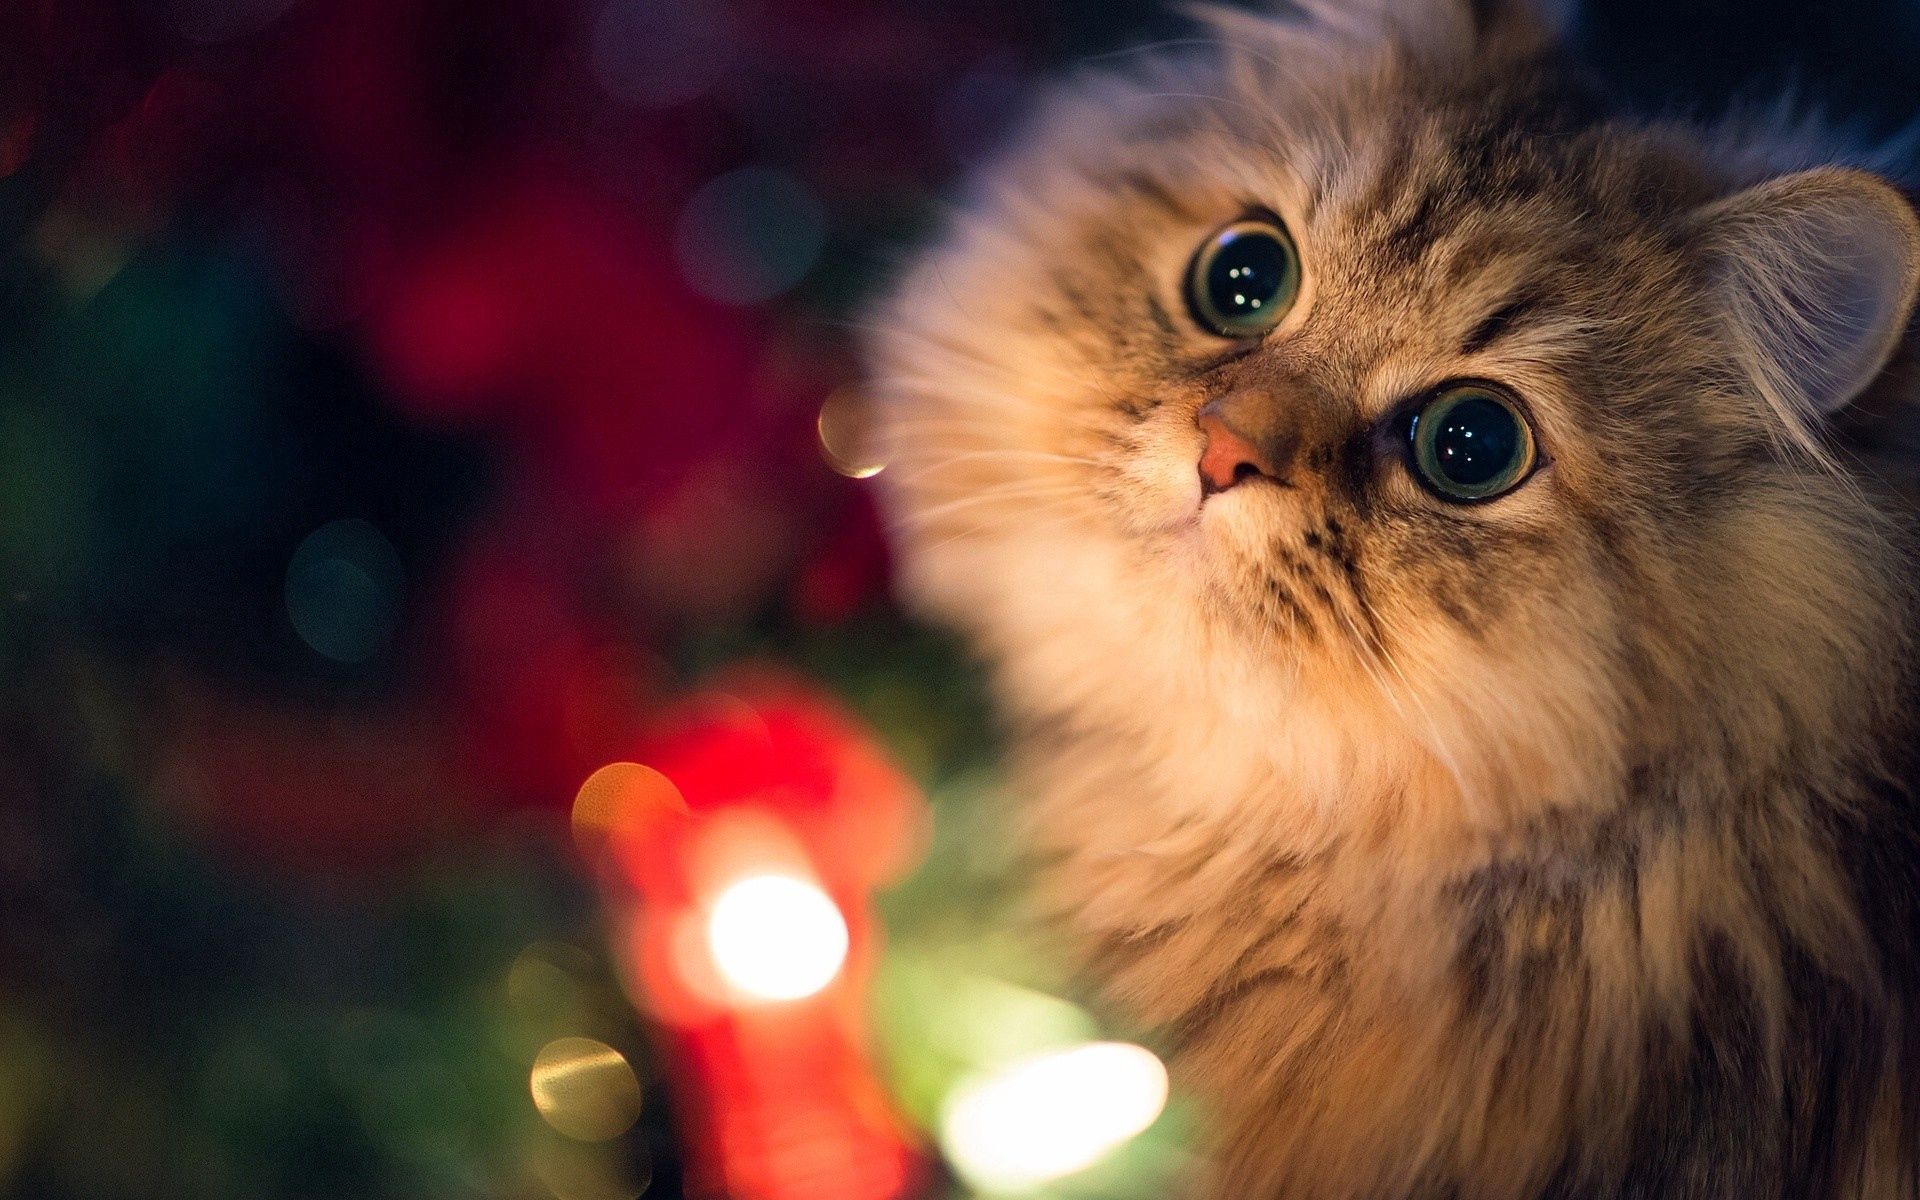 animals, cat, fluffy, muzzle, sight, opinion, expectation, waiting wallpapers for tablet